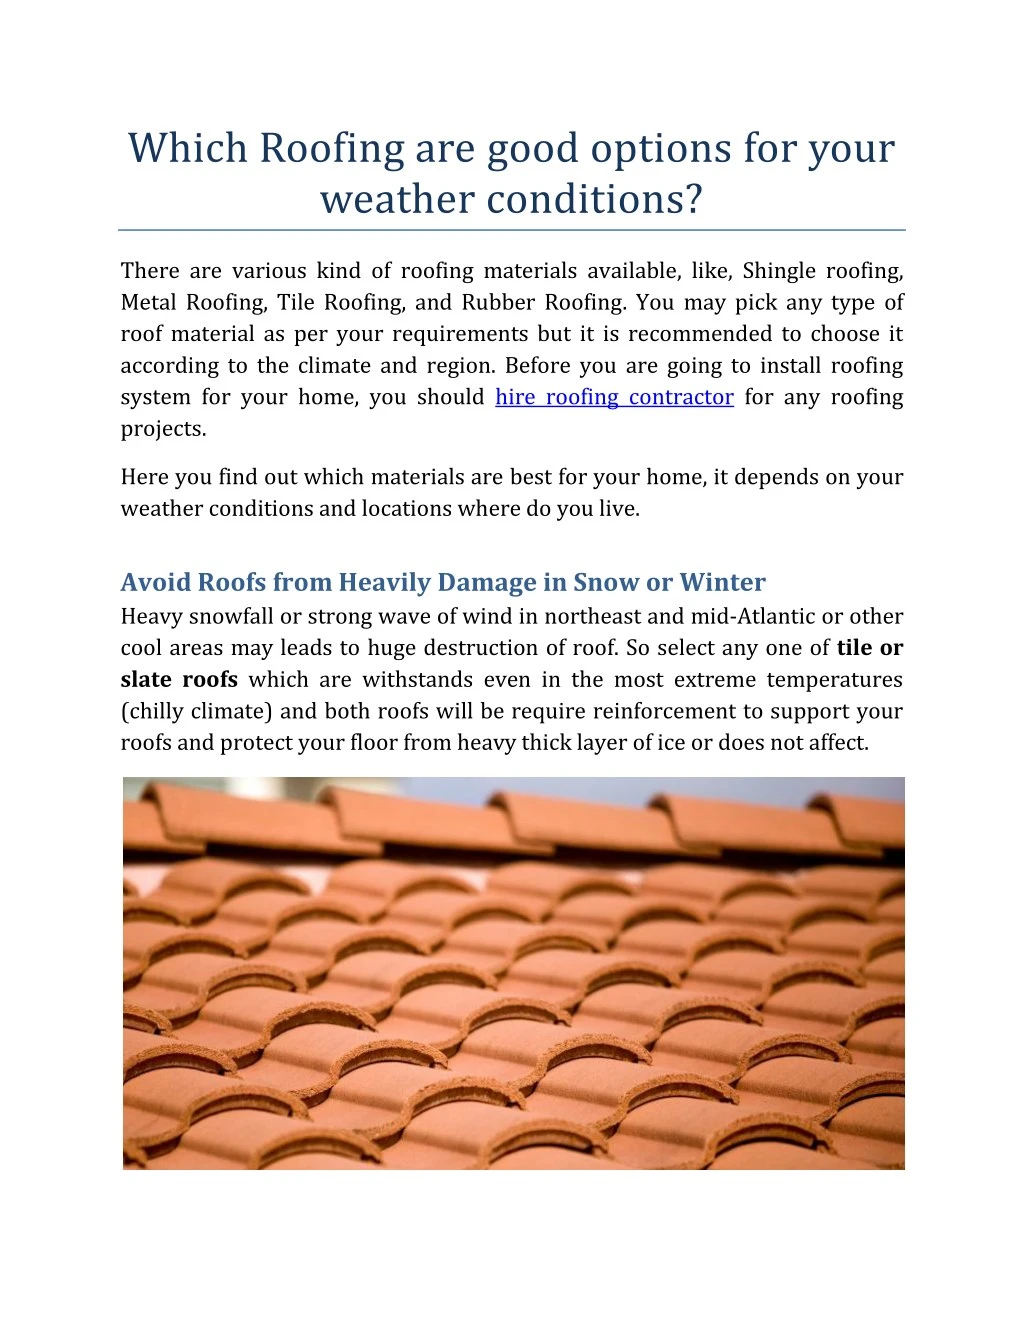 which roofing are good options for your weather